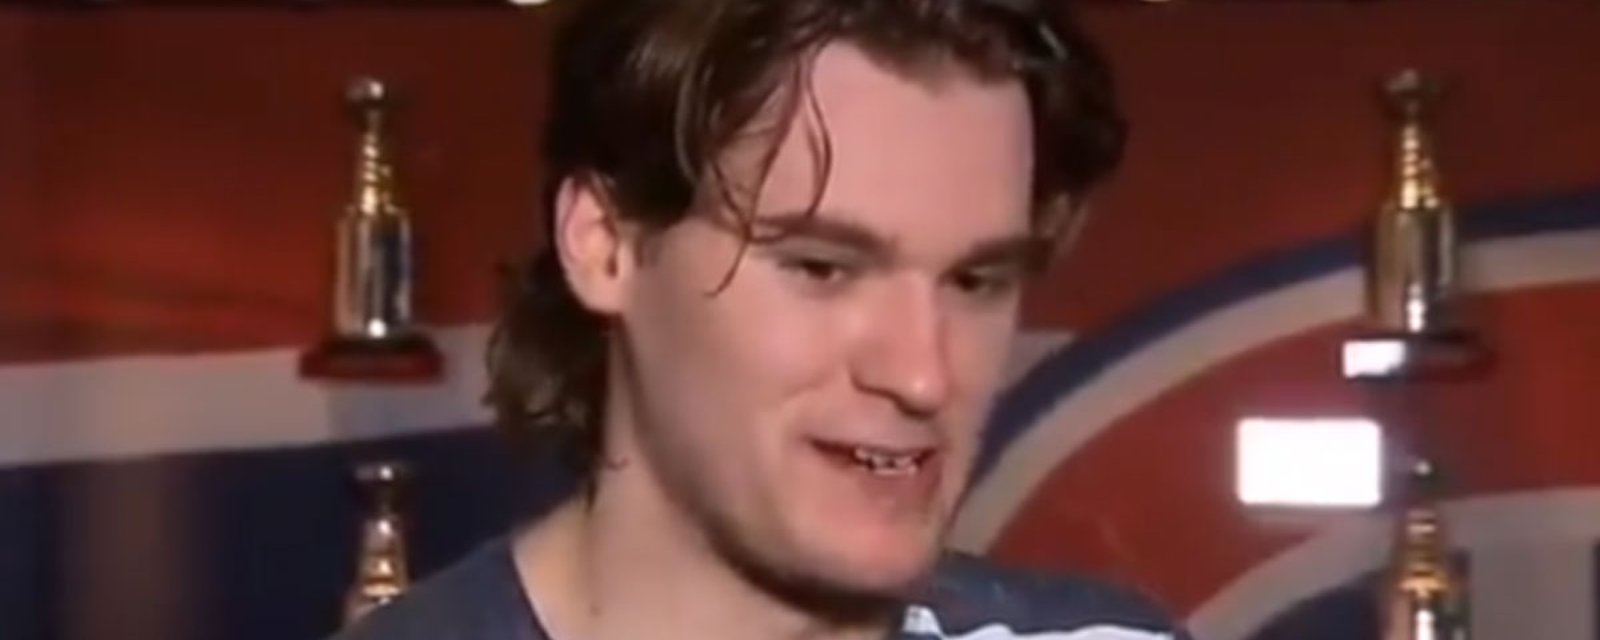 Habs' Drouin gave us the best NHL soundbite of the year when talking about the Senators! 